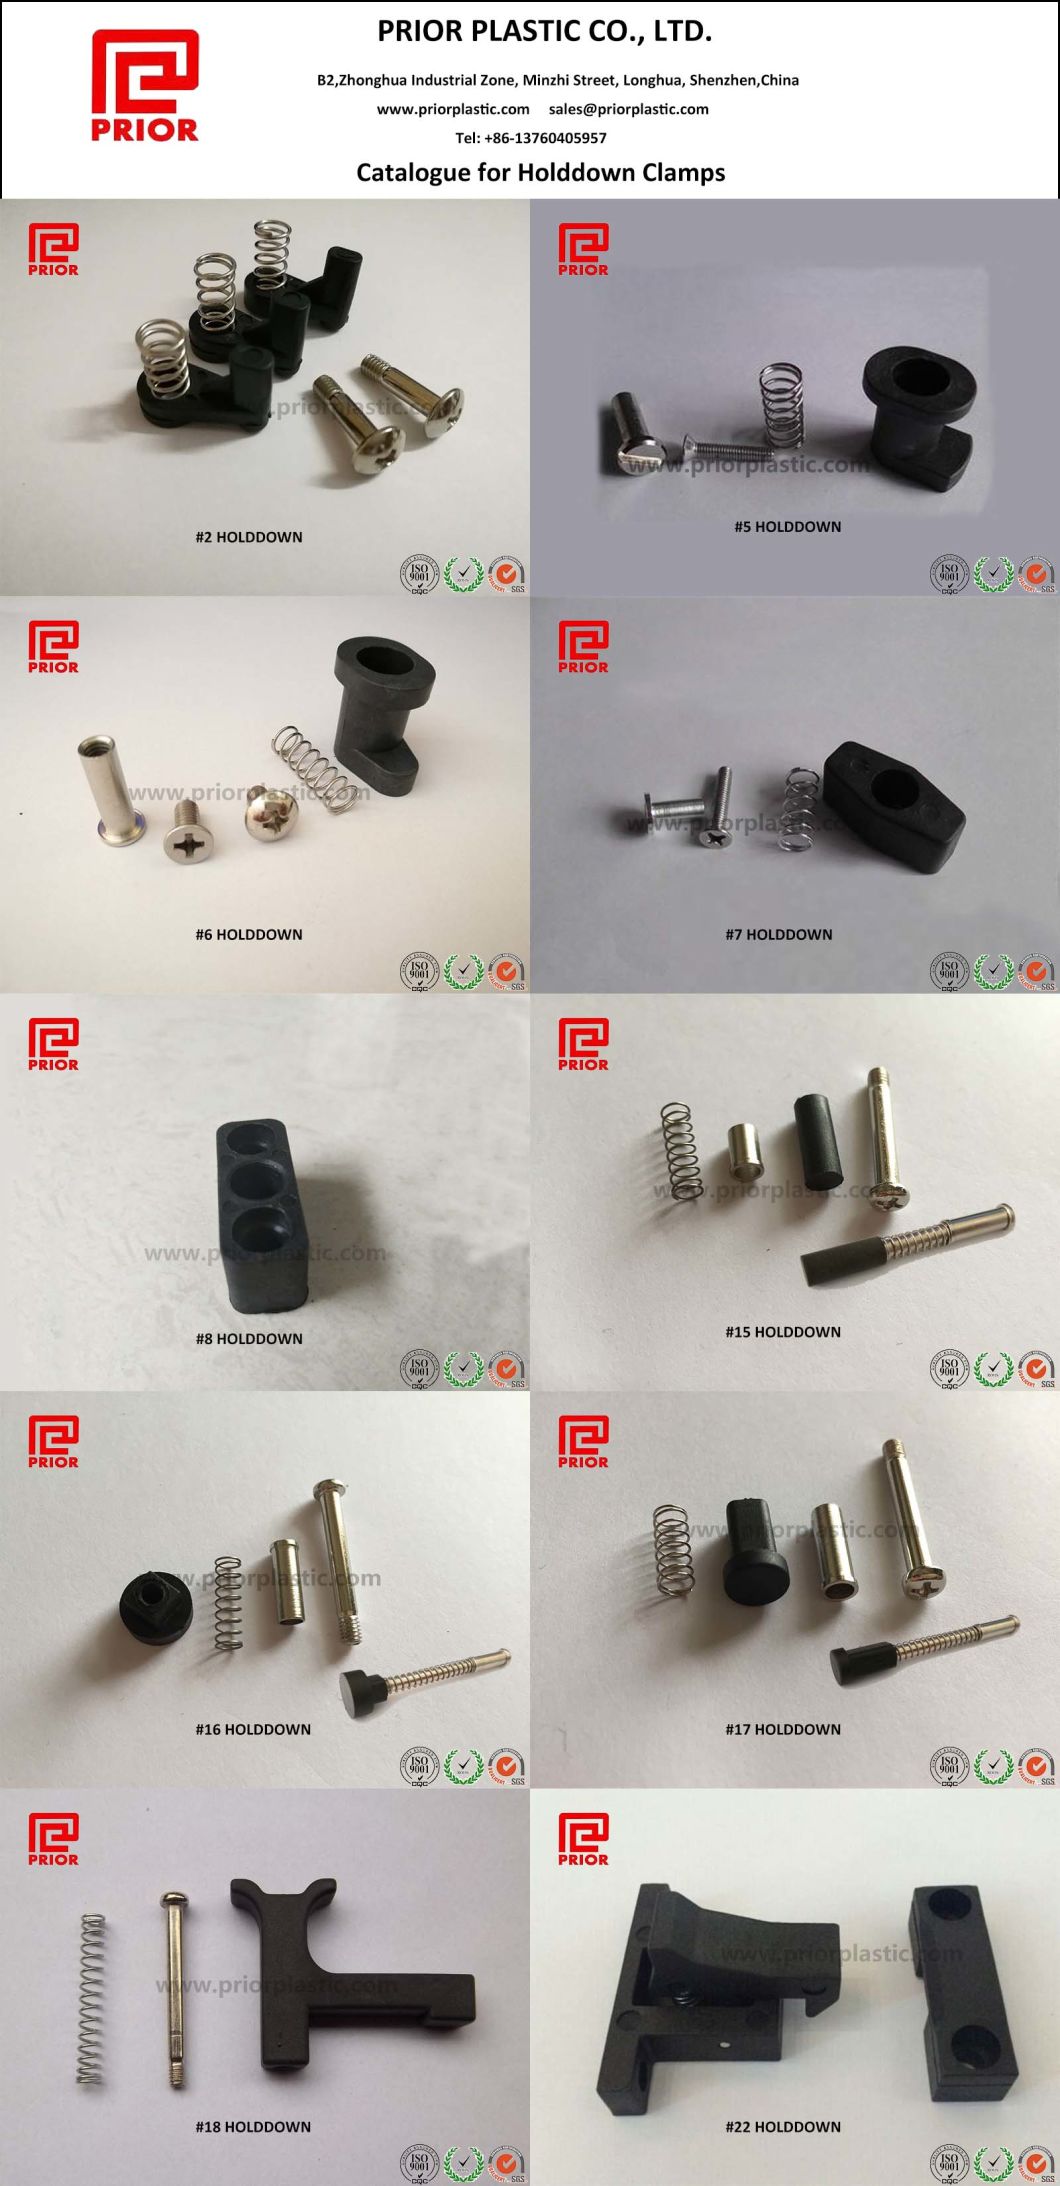 Spring Loaded Plungers Hold Components